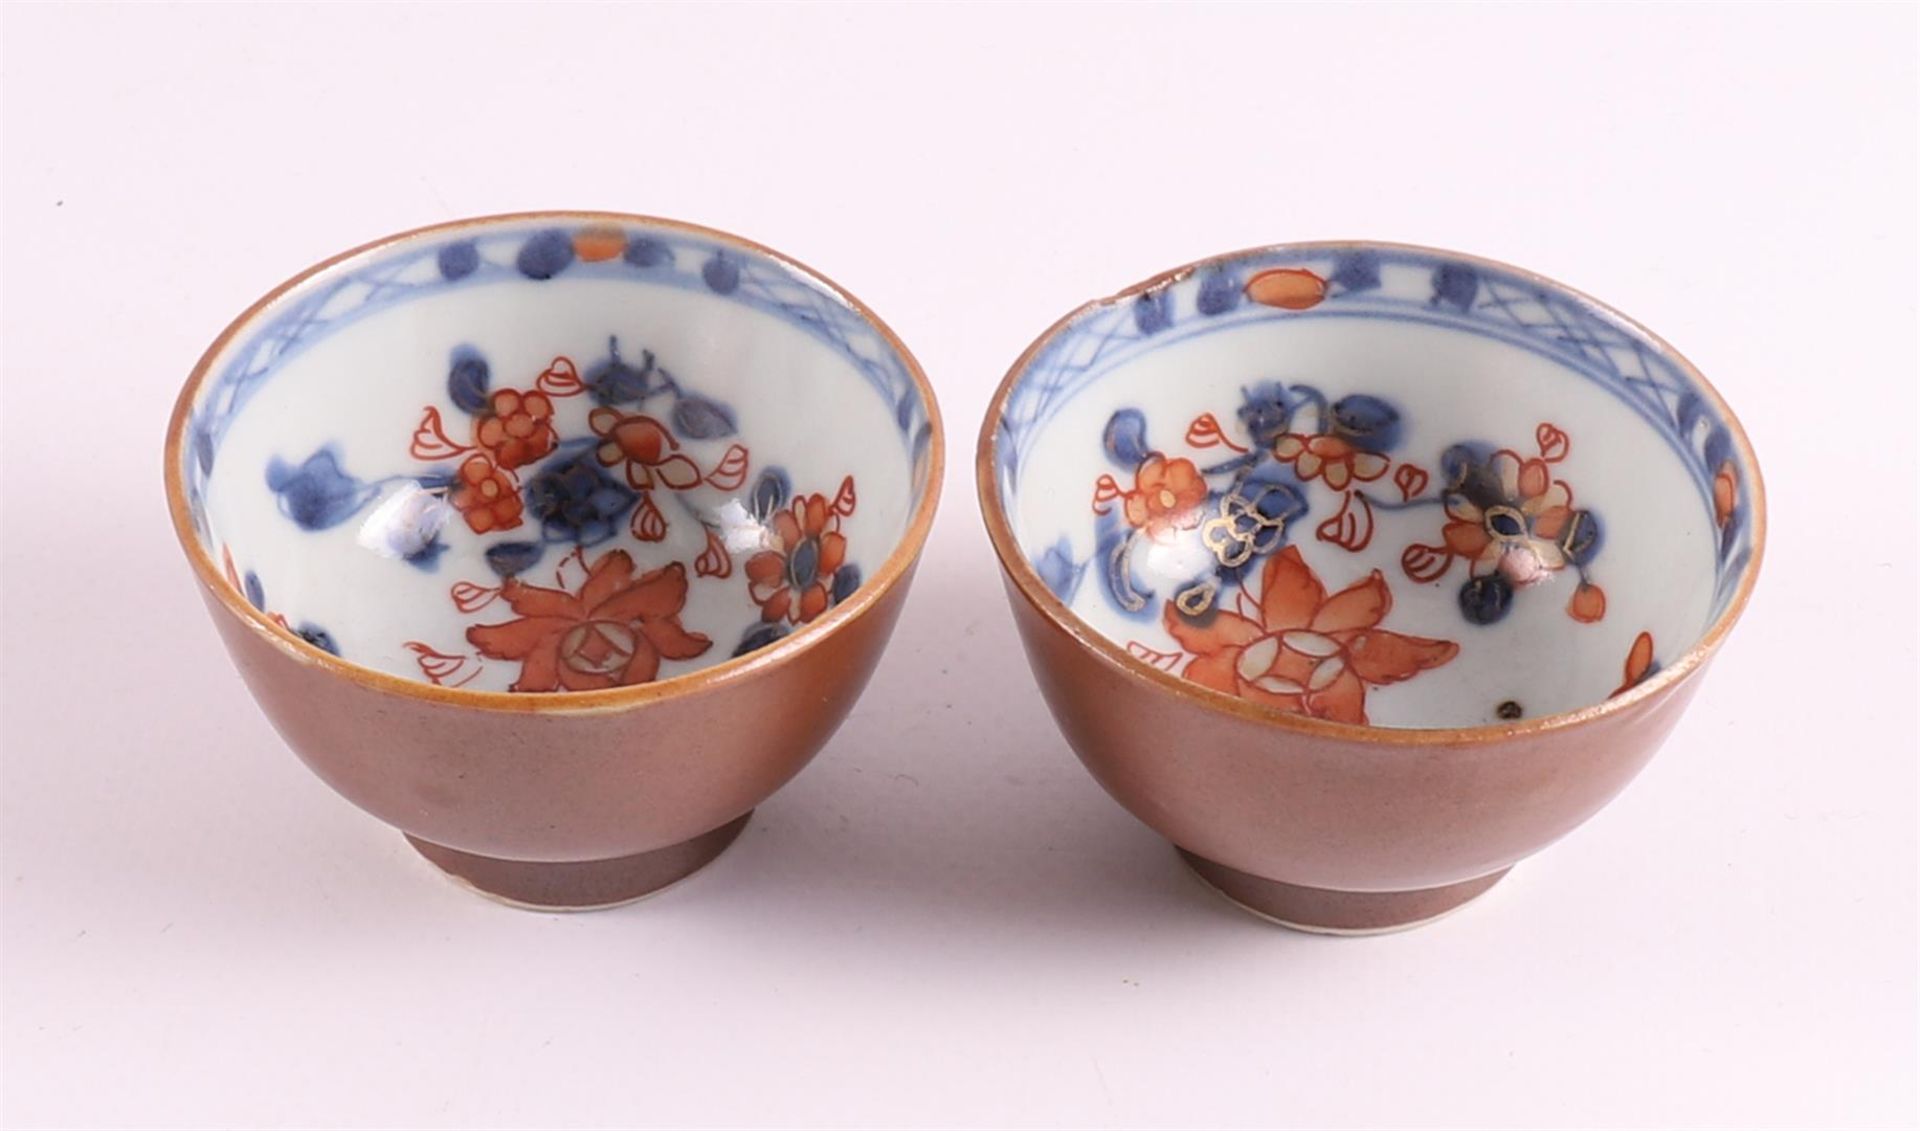 Various Chinese Imari porcelain cups and saucers, so-called Batavia ware, China - Image 14 of 16